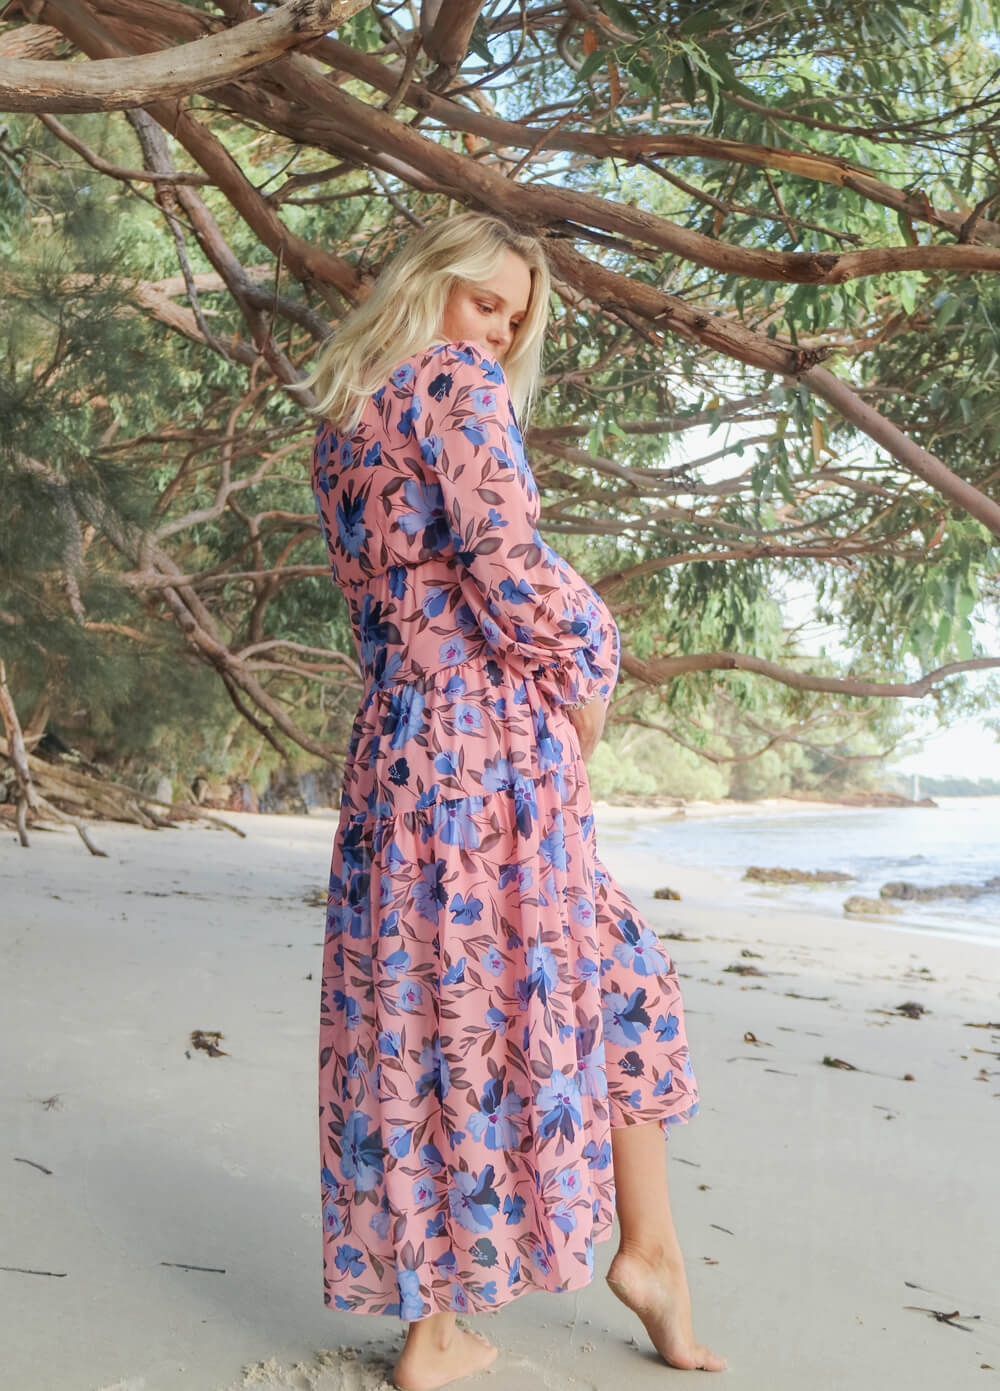 Lait & Co - Wanderlust Maternity Maxi Gown in Pink/Blue Floral